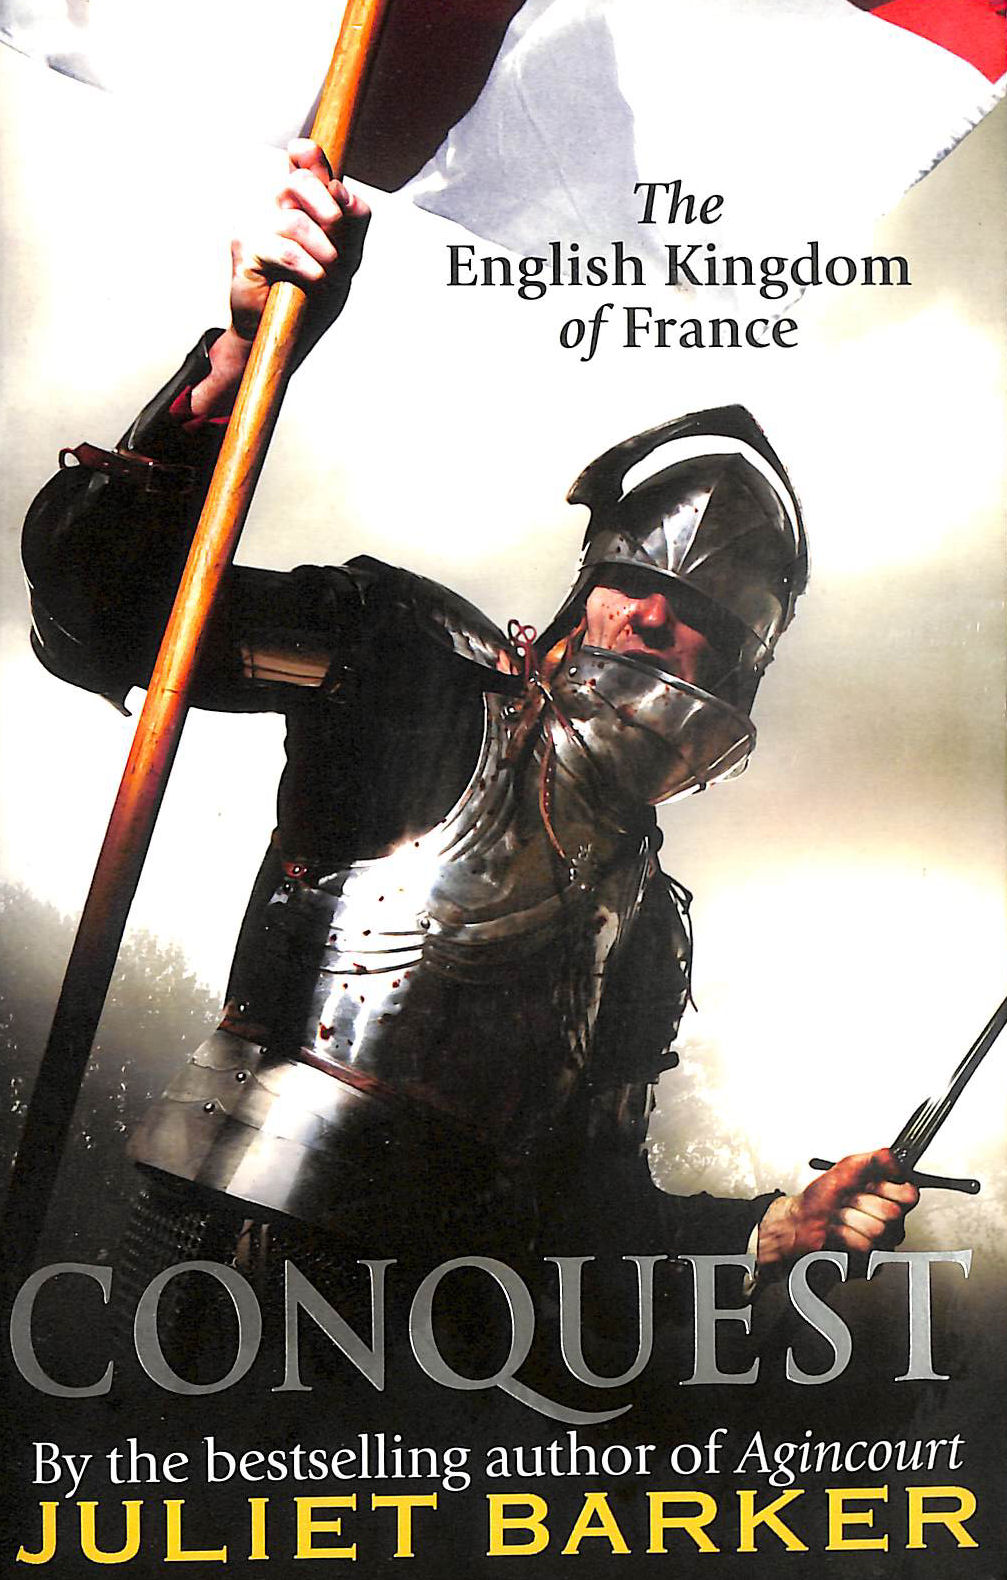 BARKER, JULIET - Conquest: The English Kingdom of France 1417-1450